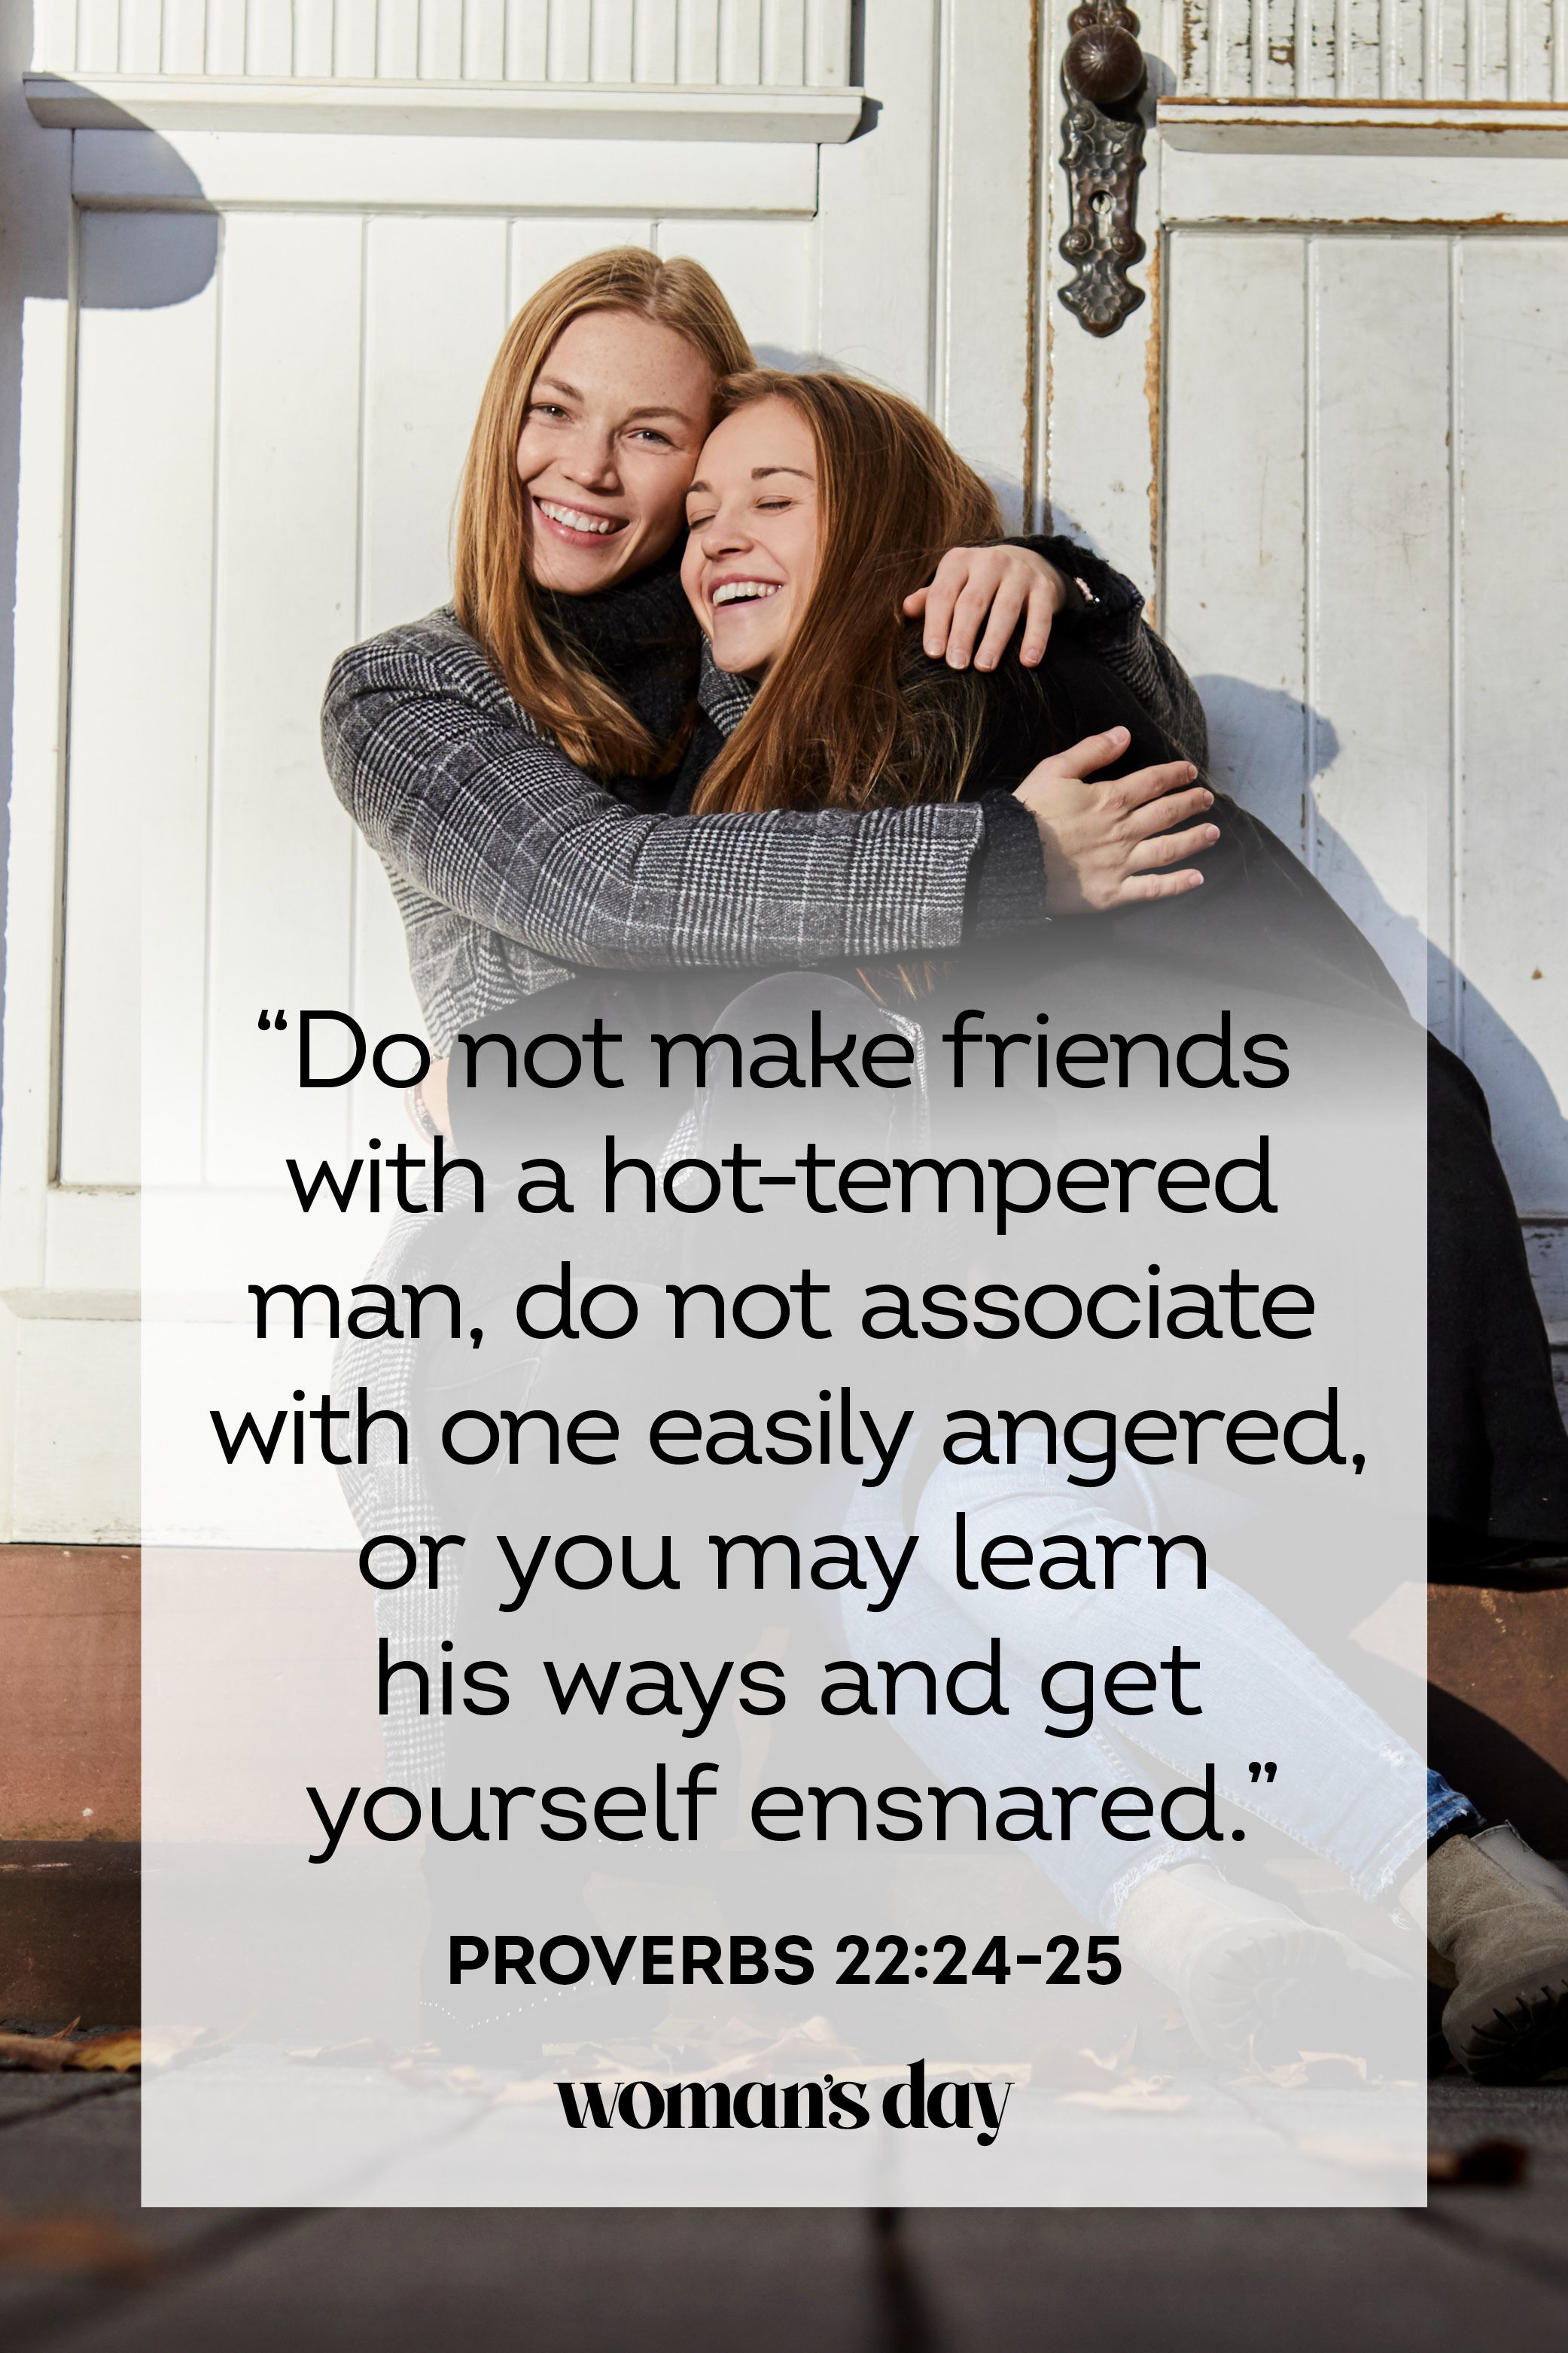 best friend quotes between boy and girl tagalog